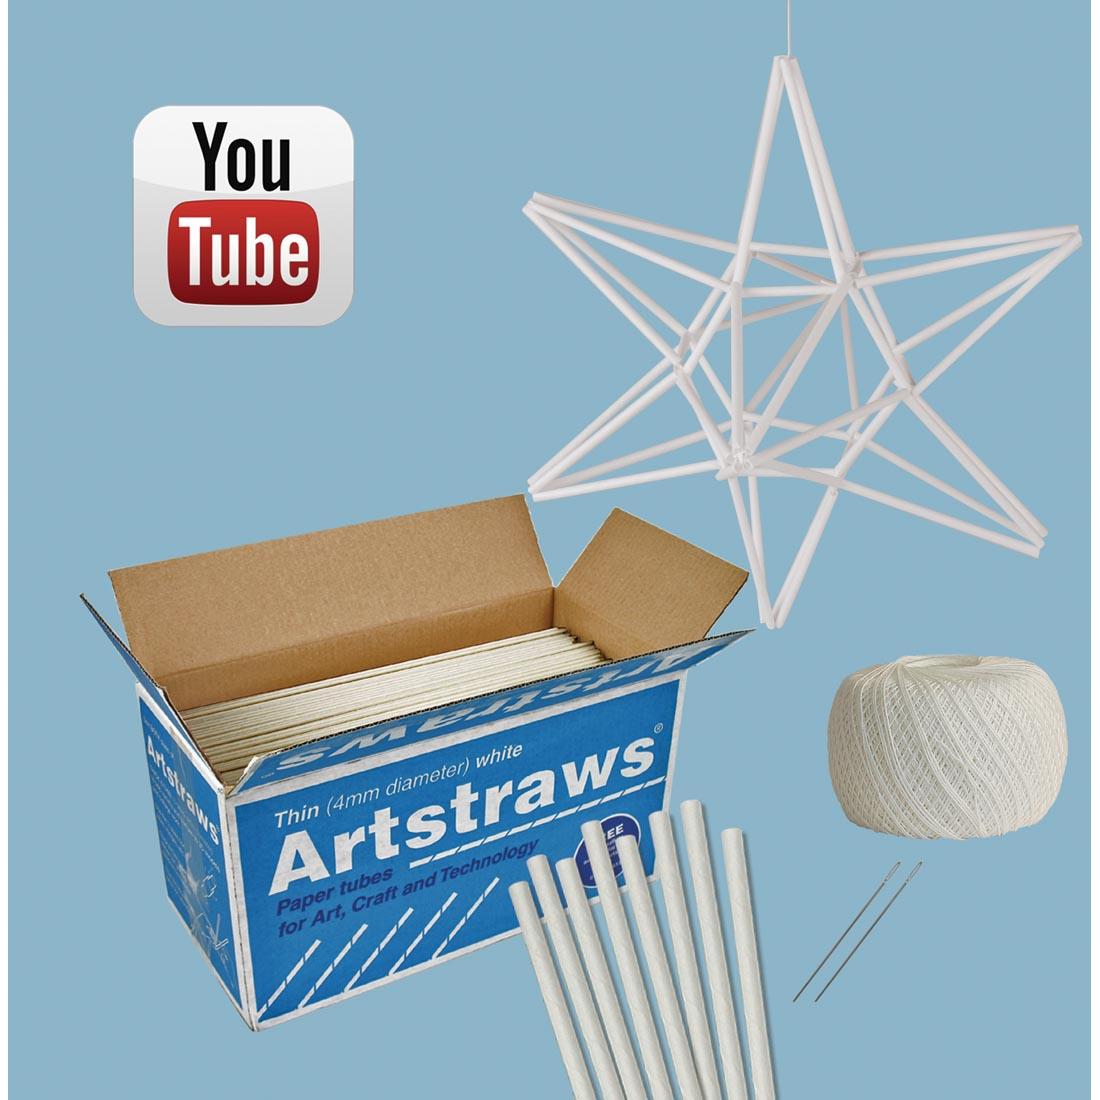 Contents of the Himmeli Star Mobile Project Kit With White Artstraws plus an example of a completed star and the YouTube logo